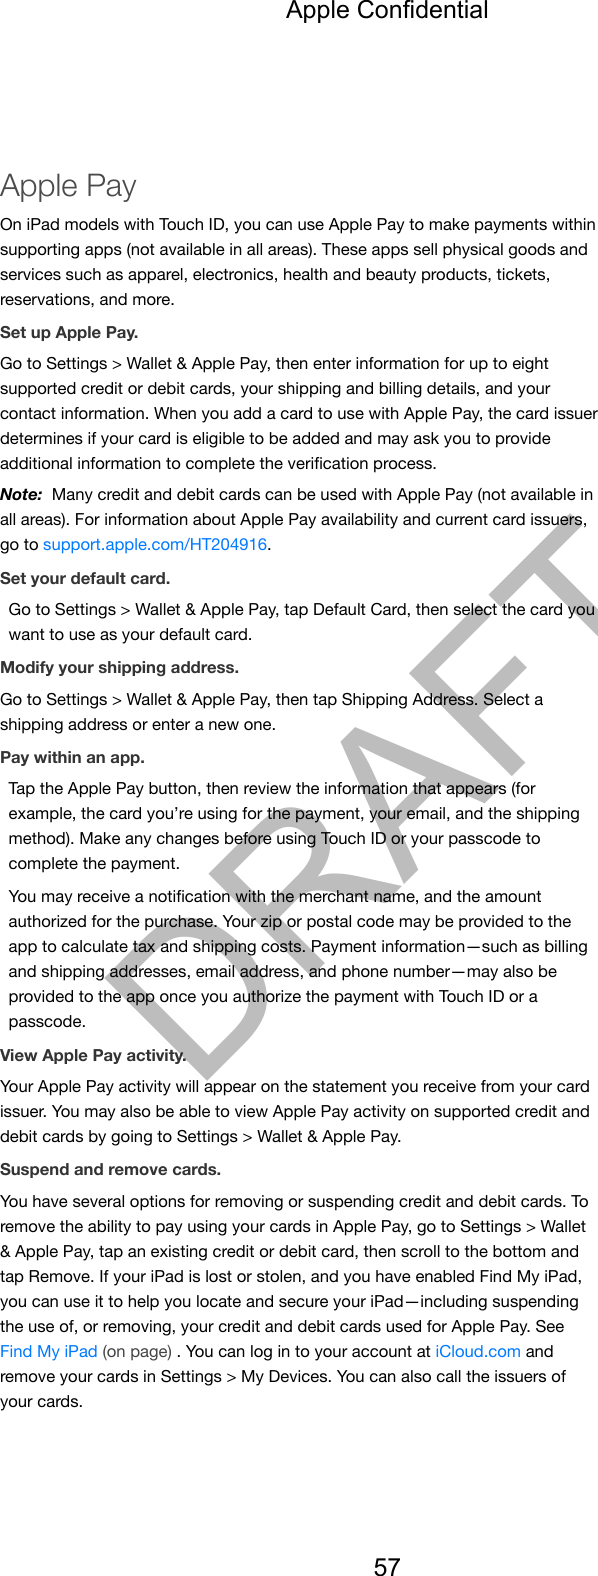 Apple PayOn iPad models with Touch ID, you can use Apple Pay to make payments withinsupporting apps (not available in all areas). These apps sell physical goods andservices such as apparel, electronics, health and beauty products, tickets,reservations, and more.Set up Apple Pay.Go to Settings &gt; Wallet &amp; Apple Pay, then enter information for up to eightsupported credit or debit cards, your shipping and billing details, and yourcontact information. When you add a card to use with Apple Pay, the card issuerdetermines if your card is eligible to be added and may ask you to provideadditional information to complete the veriﬁcation process.Note:  Many credit and debit cards can be used with Apple Pay (not available inall areas). For information about Apple Pay availability and current card issuers,go to support.apple.com/HT204916.Set your default card.Go to Settings &gt; Wallet &amp; Apple Pay, tap Default Card, then select the card youwant to use as your default card.Modify your shipping address.Go to Settings &gt; Wallet &amp; Apple Pay, then tap Shipping Address. Select ashipping address or enter a new one.Pay within an app.Tap the Apple Pay button, then review the information that appears (forexample, the card you’re using for the payment, your email, and the shippingmethod). Make any changes before using Touch ID or your passcode tocomplete the payment.You may receive a notiﬁcation with the merchant name, and the amountauthorized for the purchase. Your zip or postal code may be provided to theapp to calculate tax and shipping costs. Payment information—such as billingand shipping addresses, email address, and phone number—may also beprovided to the app once you authorize the payment with Touch ID or apasscode.View Apple Pay activity.Your Apple Pay activity will appear on the statement you receive from your cardissuer. You may also be able to view Apple Pay activity on supported credit anddebit cards by going to Settings &gt; Wallet &amp; Apple Pay.Suspend and remove cards.You have several options for removing or suspending credit and debit cards. Toremove the ability to pay using your cards in Apple Pay, go to Settings &gt; Wallet&amp; Apple Pay, tap an existing credit or debit card, then scroll to the bottom andtap Remove. If your iPad is lost or stolen, and you have enabled Find My iPad,you can use it to help you locate and secure your iPad—including suspendingthe use of, or removing, your credit and debit cards used for Apple Pay. SeeFind My iPad (on page) . You can log in to your account at iCloud.com andremove your cards in Settings &gt; My Devices. You can also call the issuers ofyour cards.Apple Confidential57DRAFT